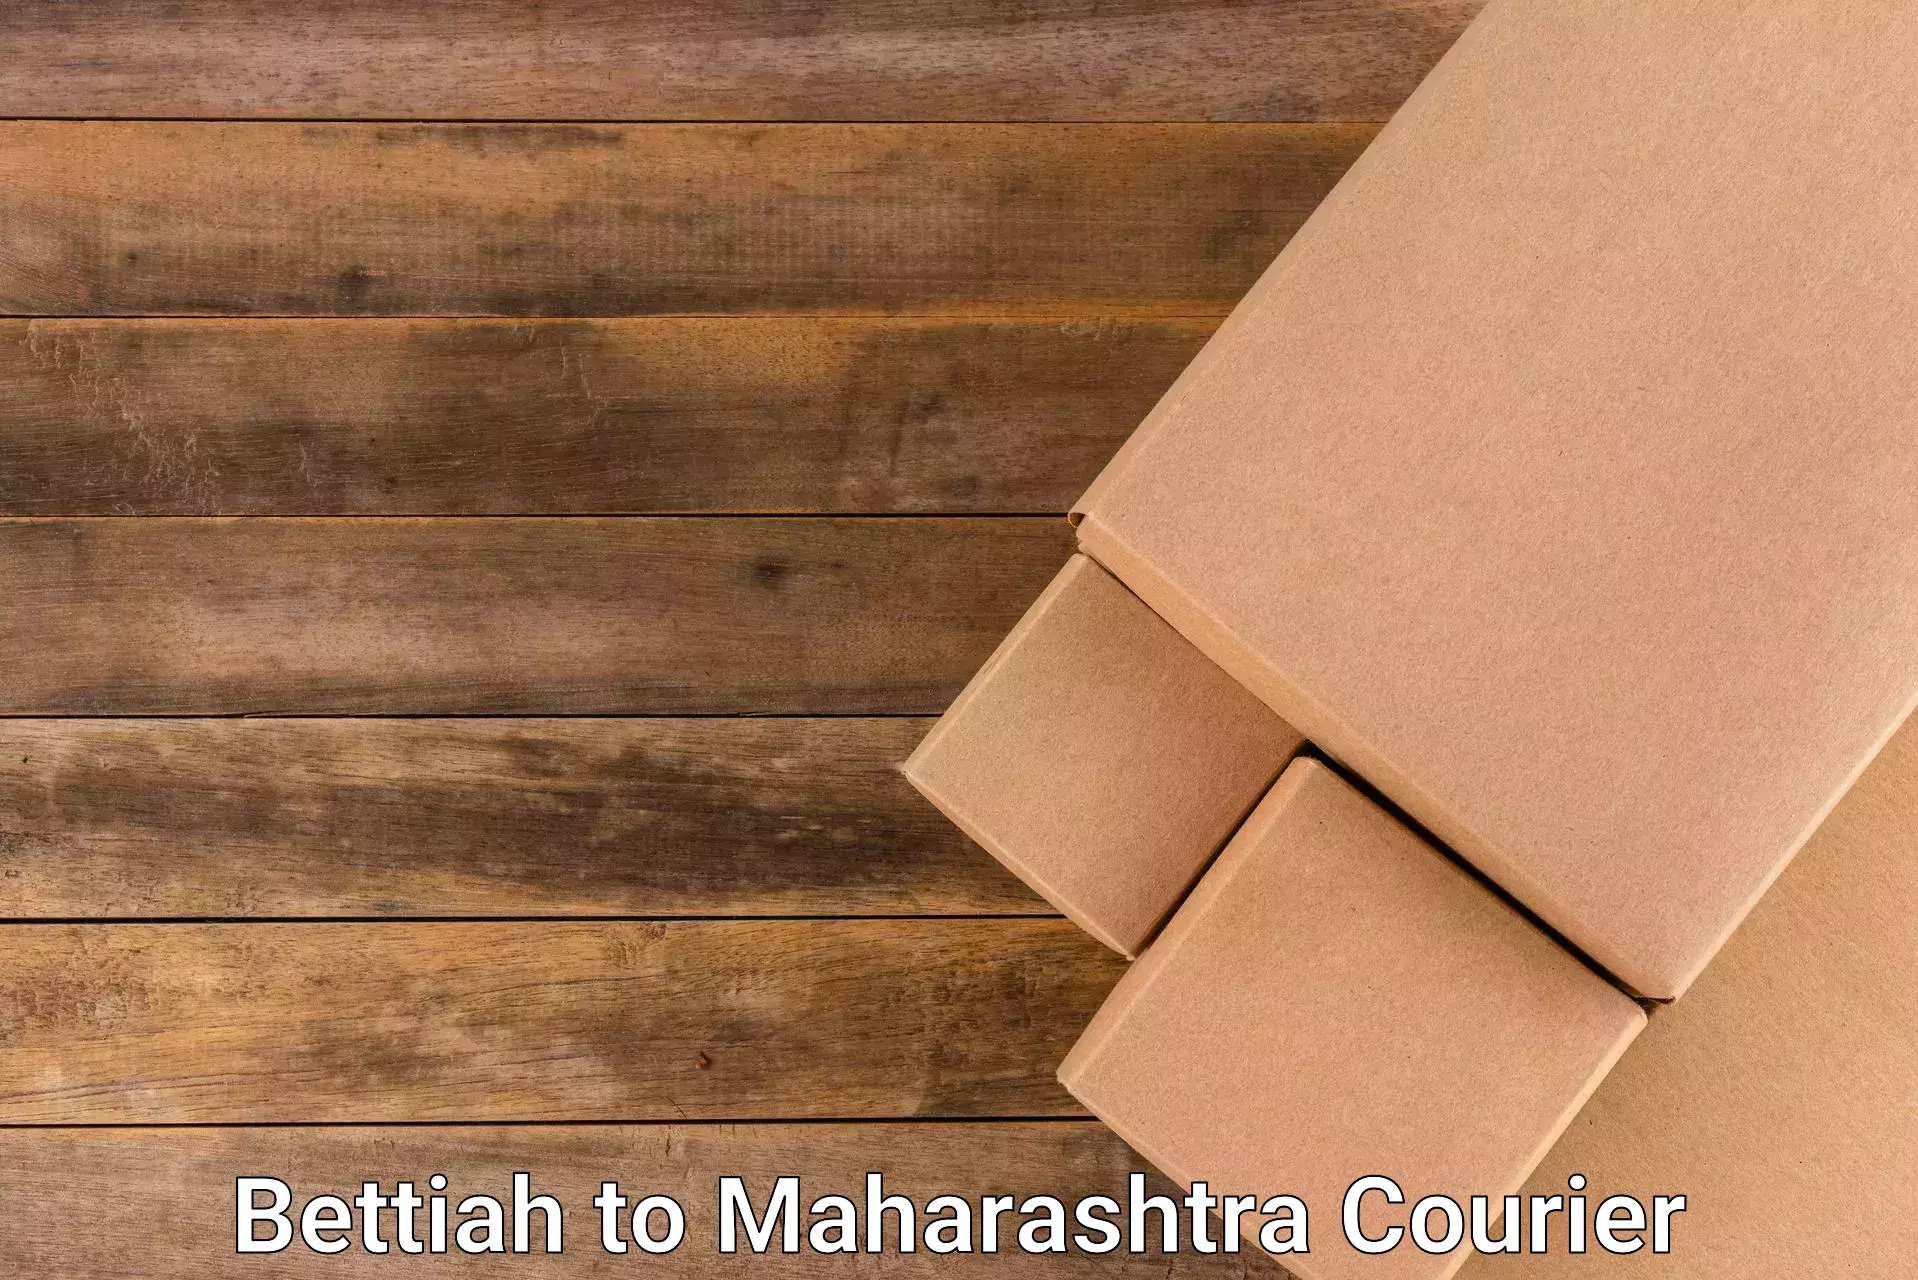 State-of-the-art courier technology Bettiah to Maharashtra